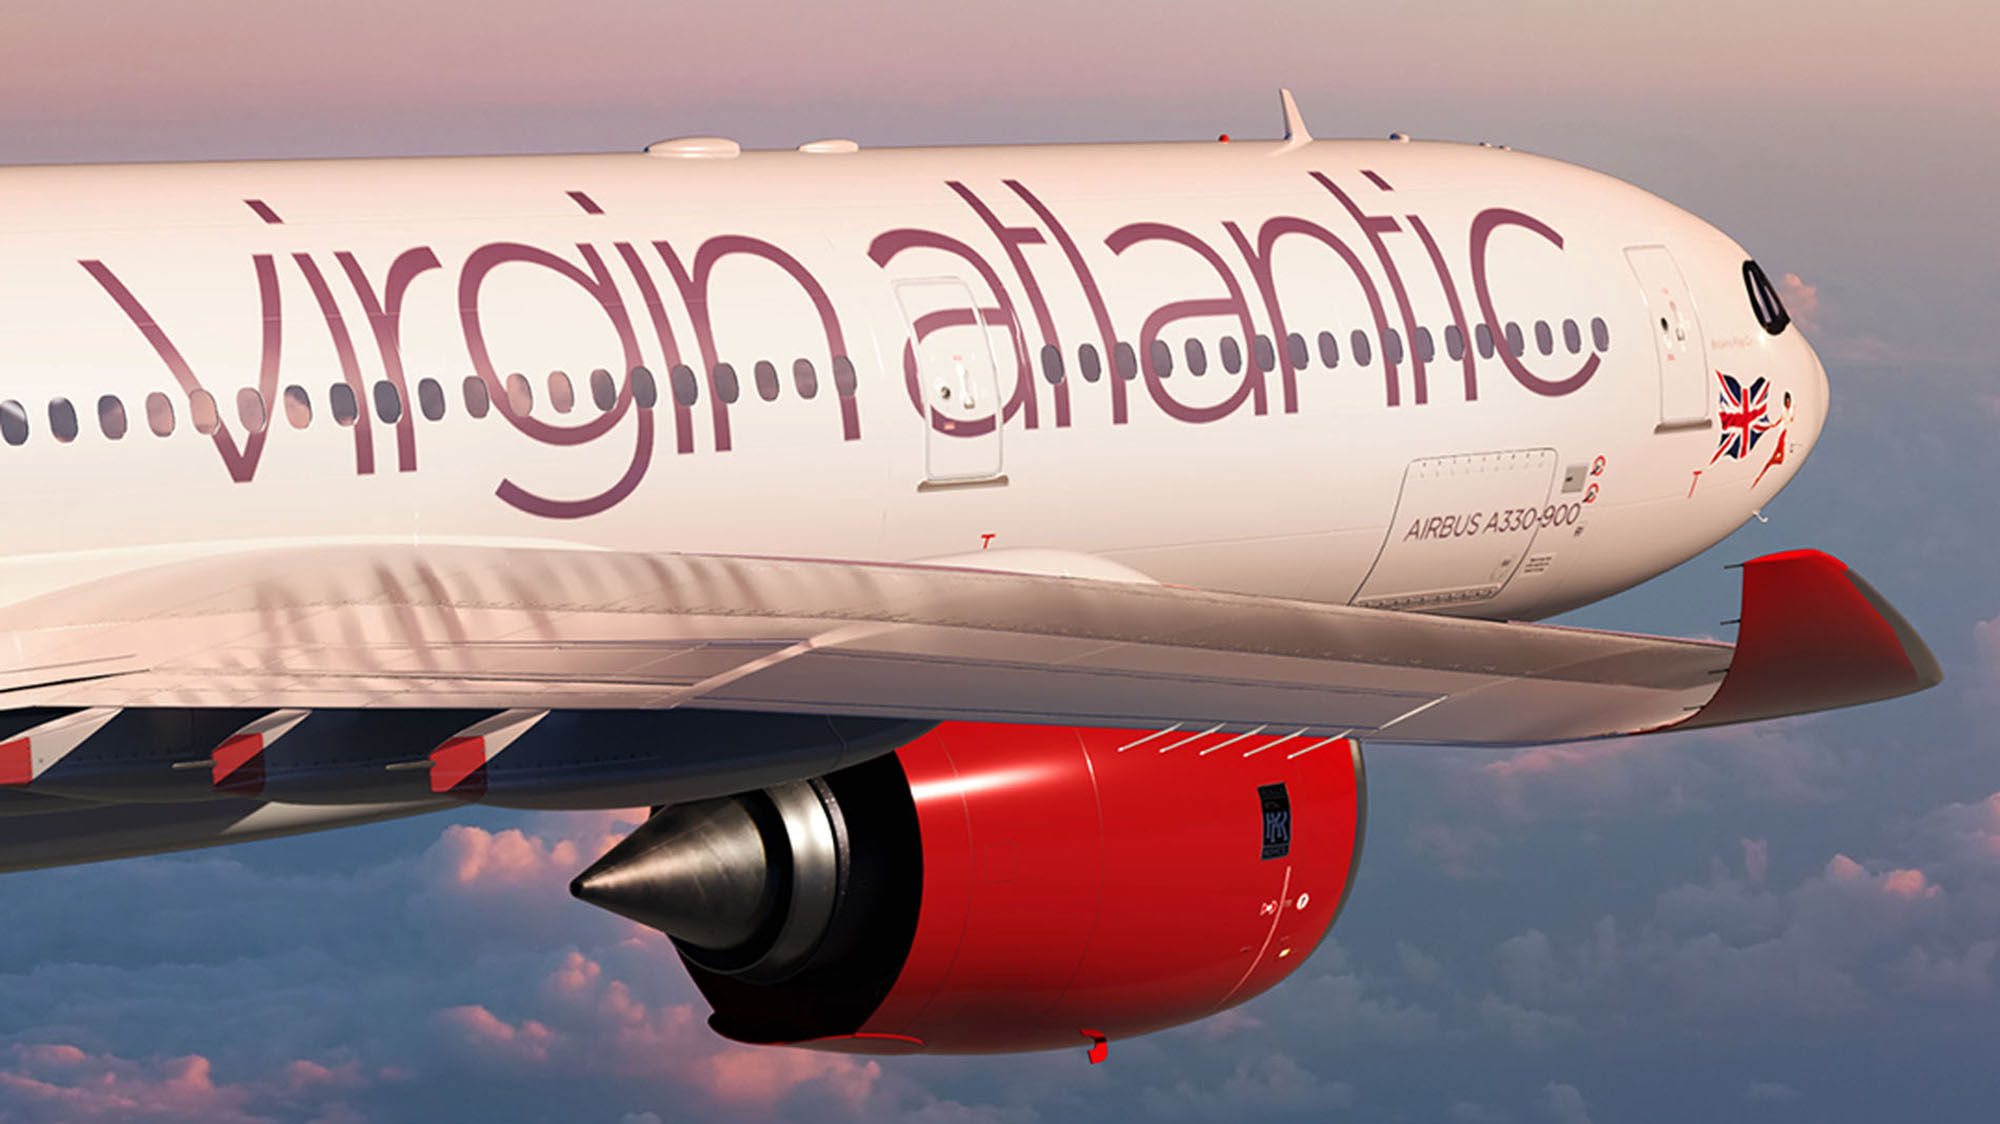 Virgin Atlantic will debut its first Airbus A330neo in early October.